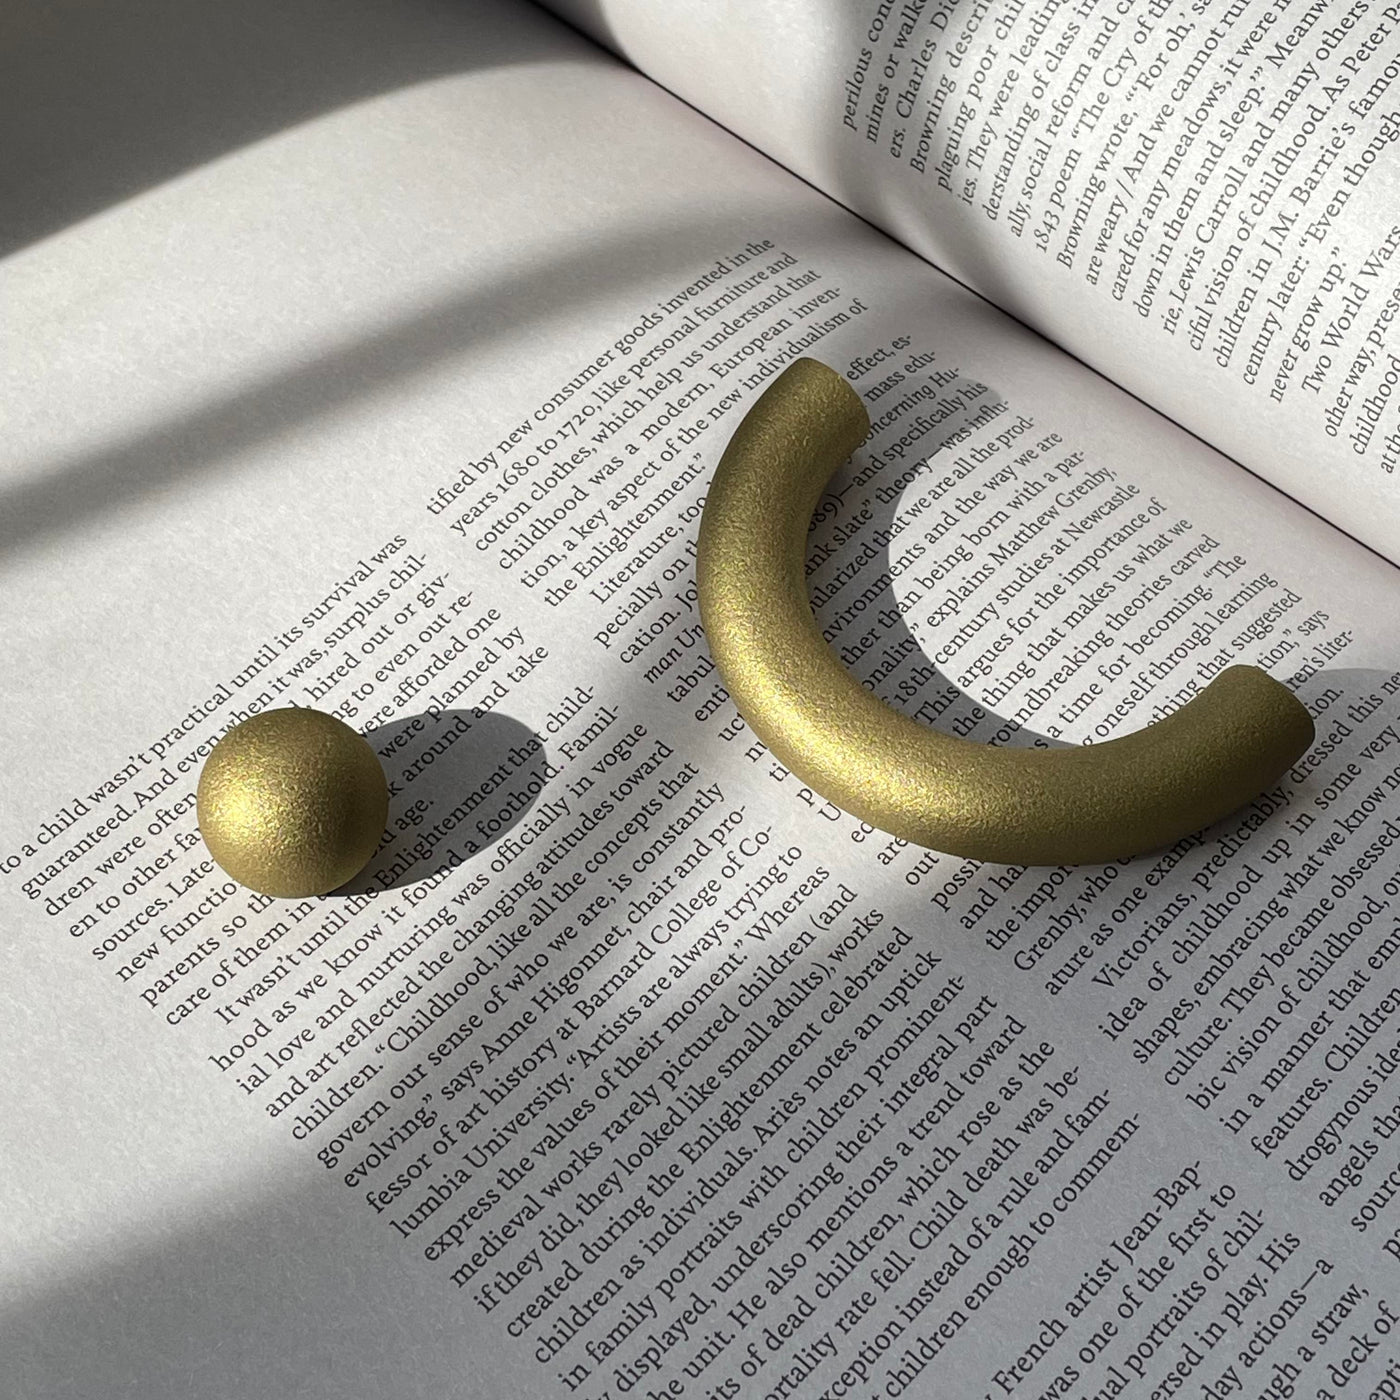 solid cast natural and white brass and bronze curved cabinet hardware handle by Maha Alavi